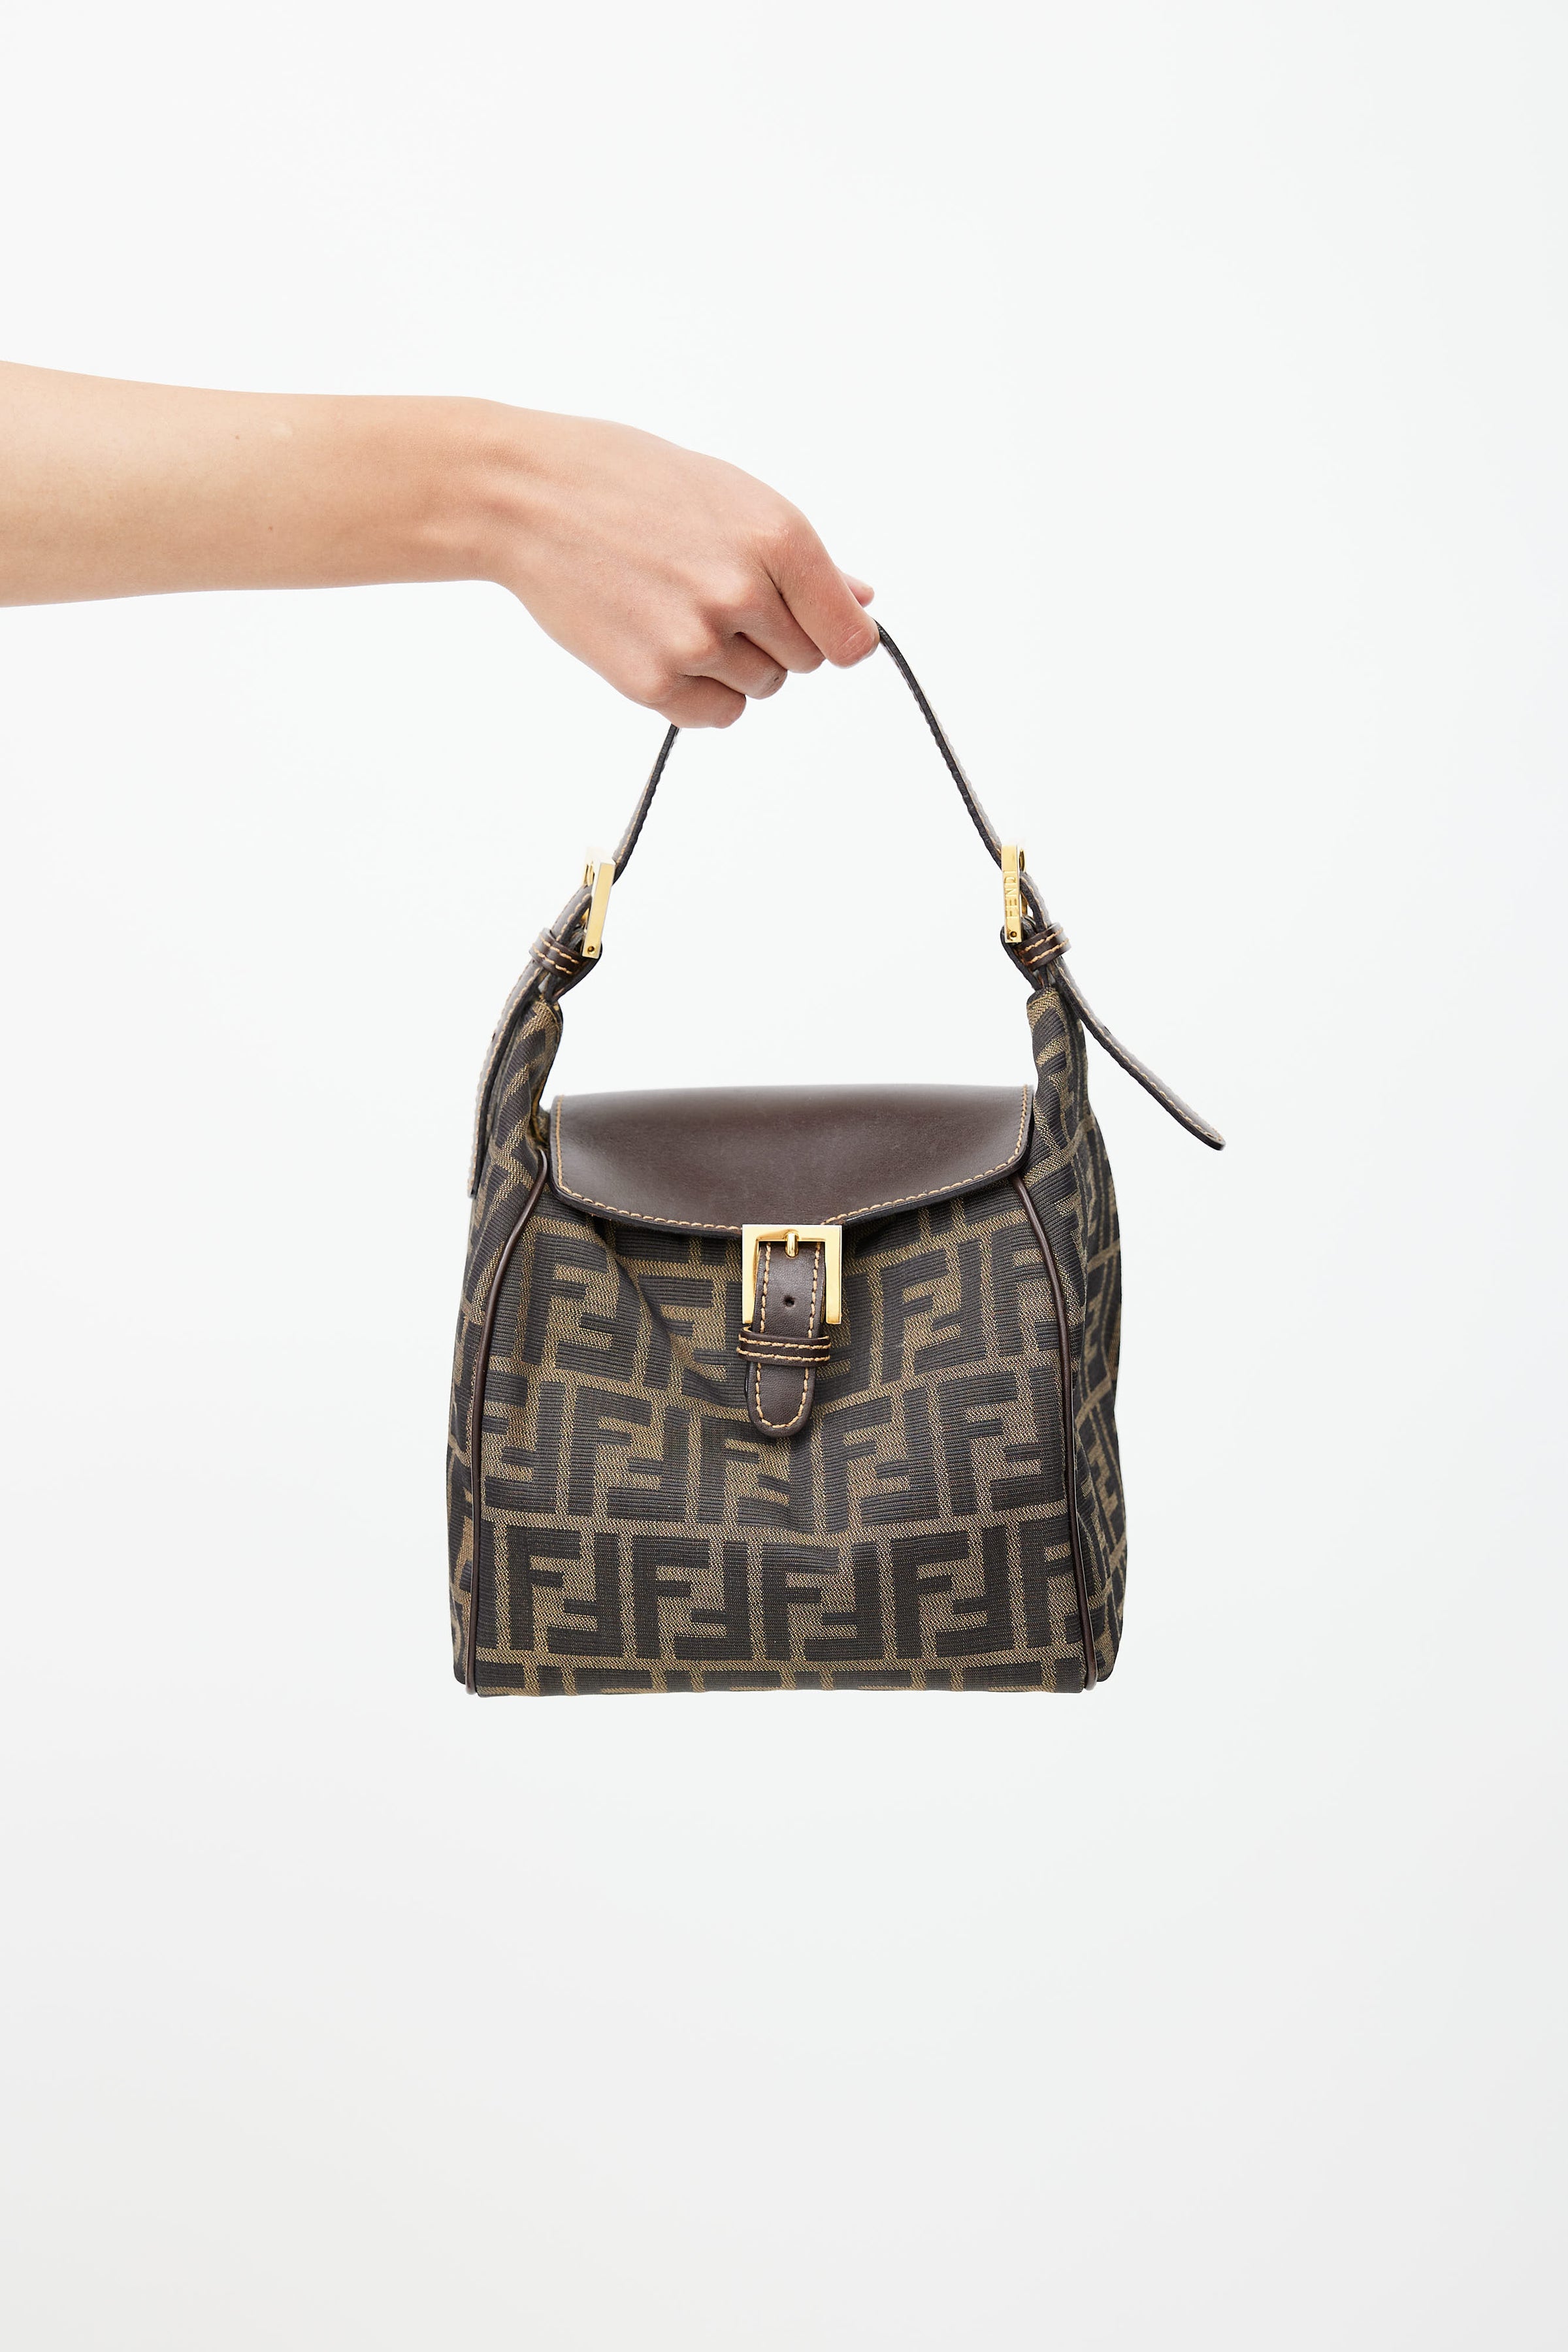 FENDI Brown Zucca Canvas and Calfskin Leather Vintage Top Handle